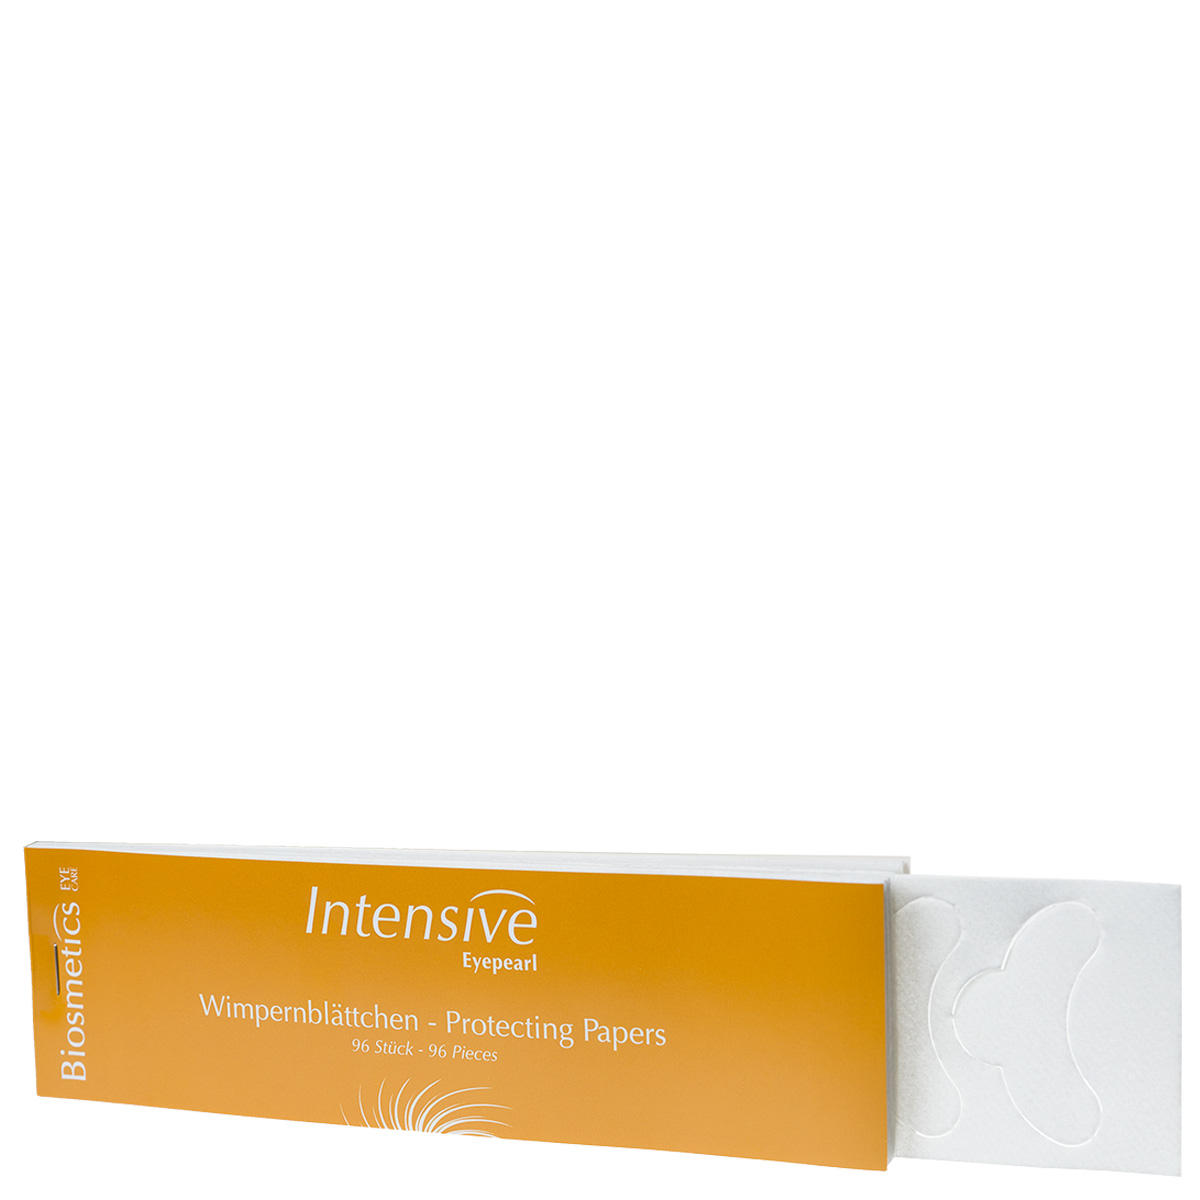 Biosmetics Intensive Eyepearl Protecting Papers  - 1